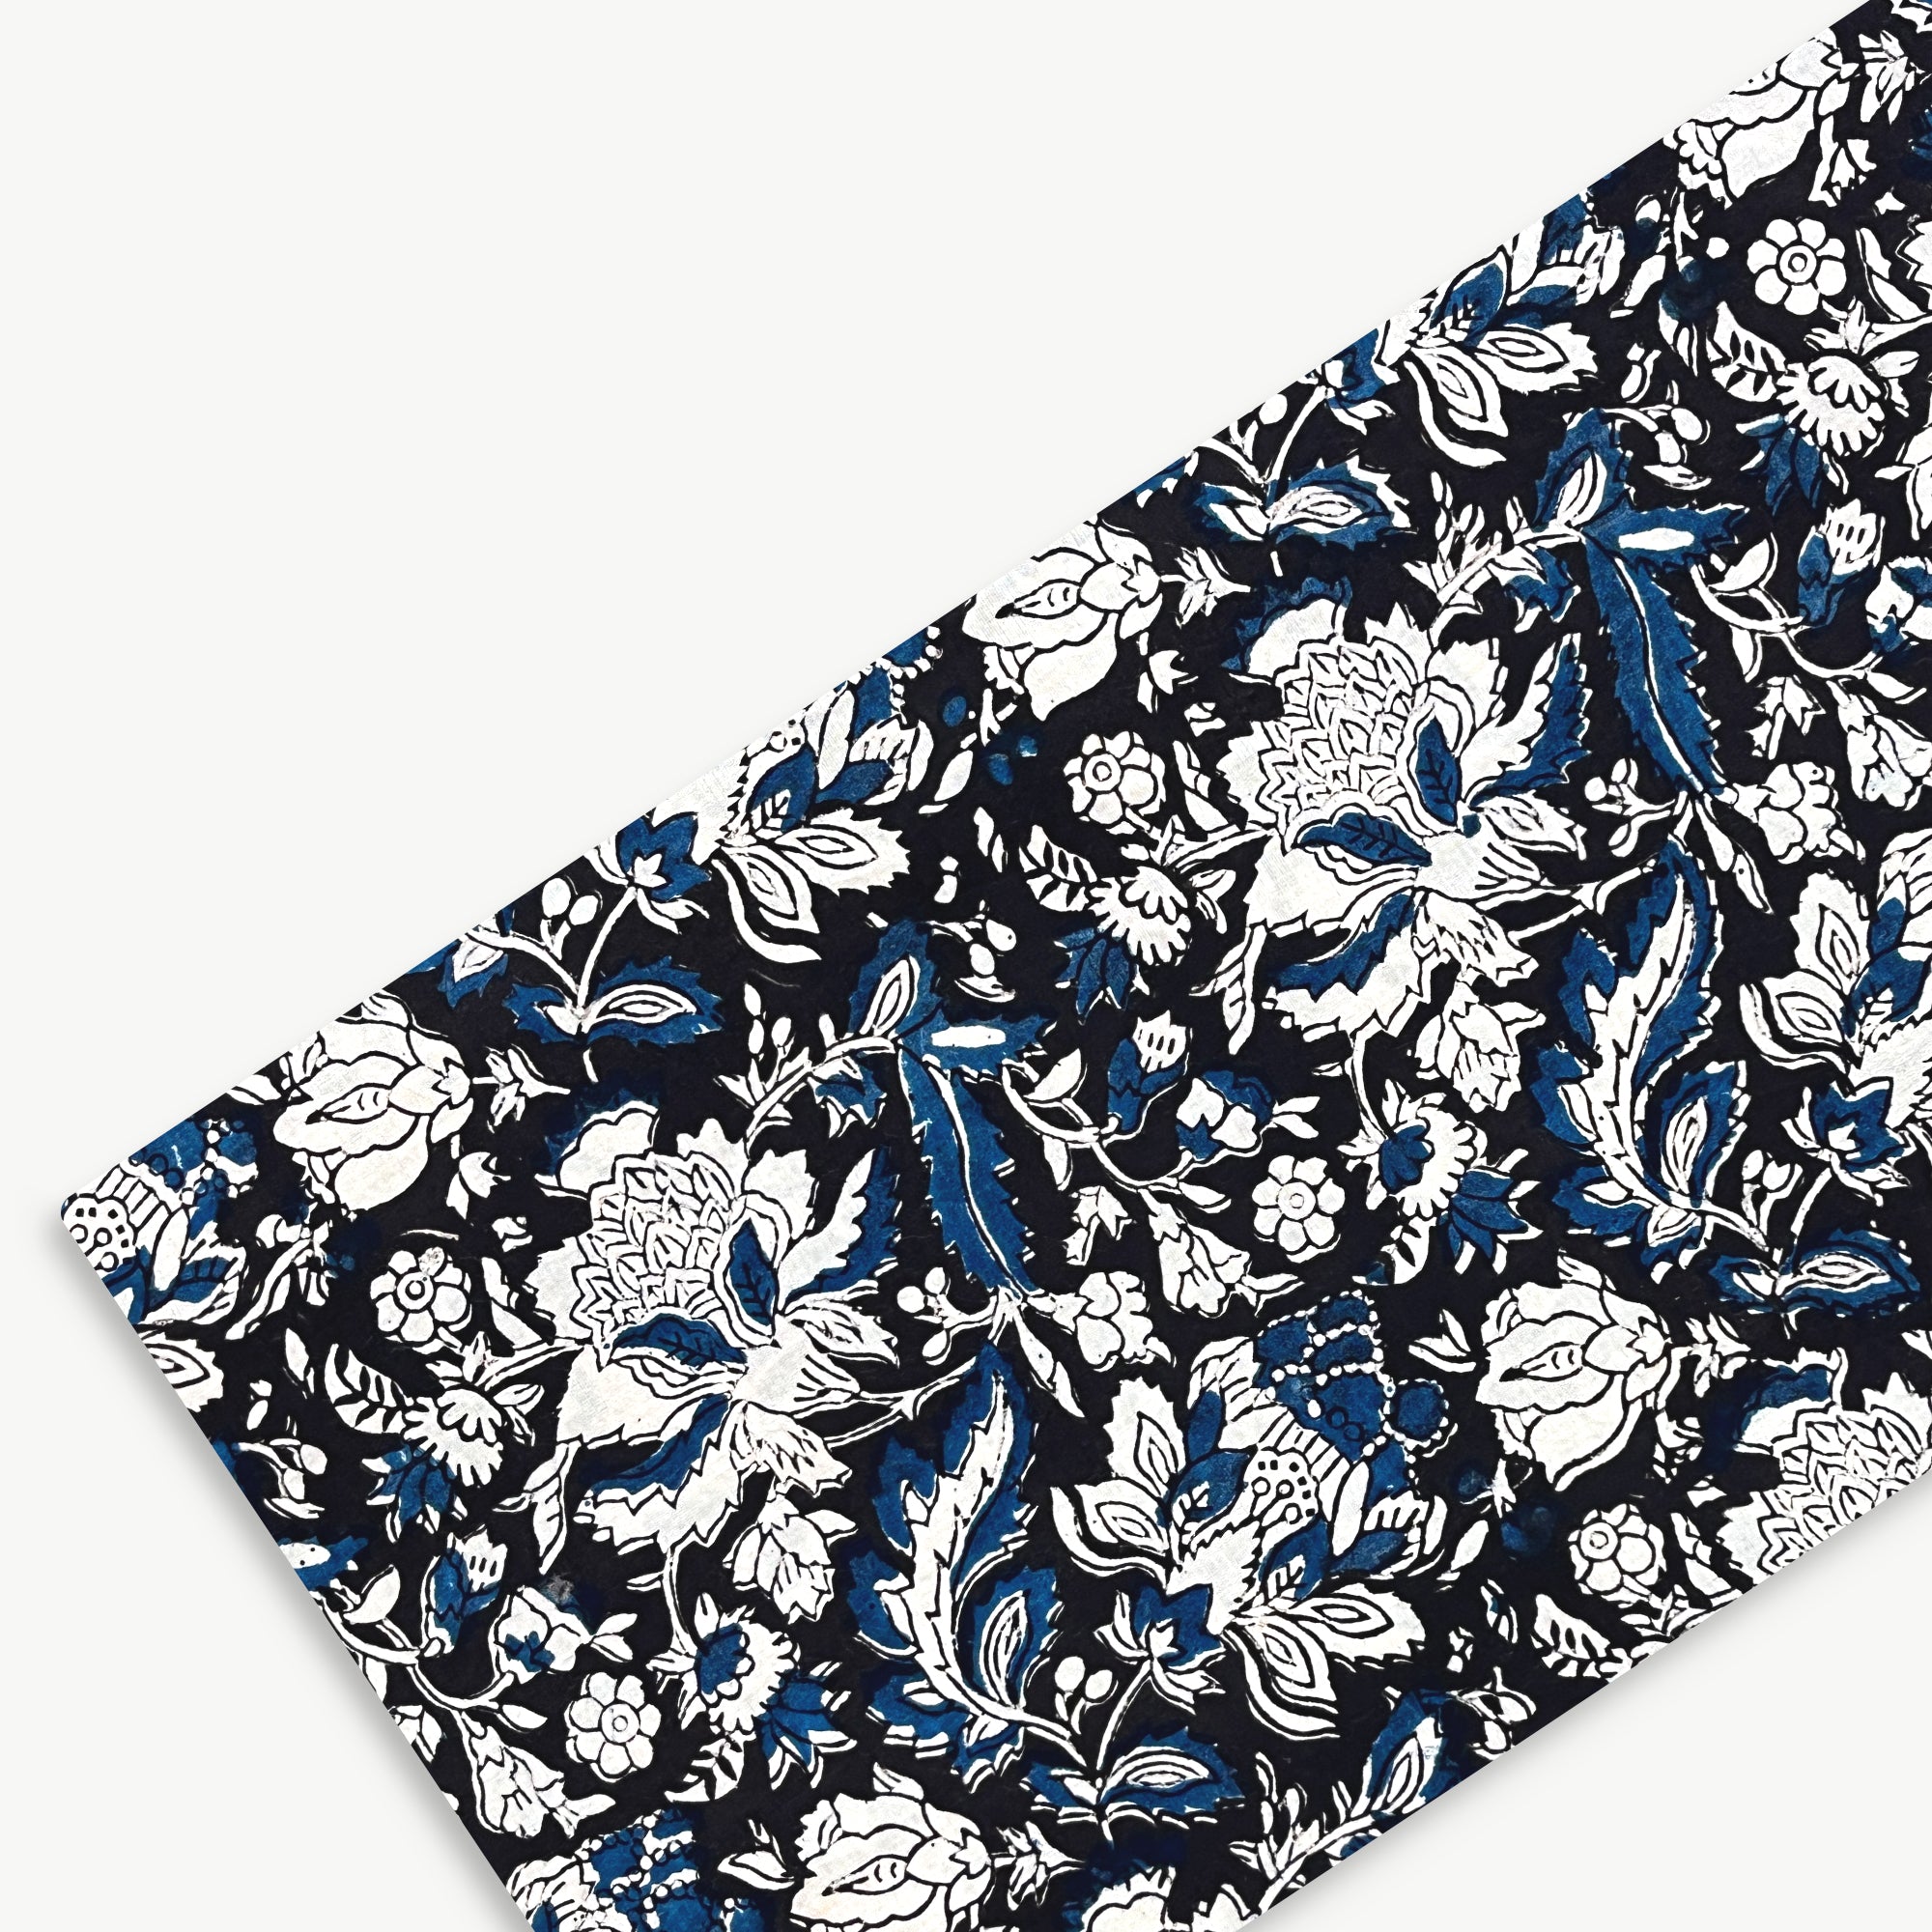 White & Blue Floral Jaal Bagru Hand Block Printed Cotton Fabric